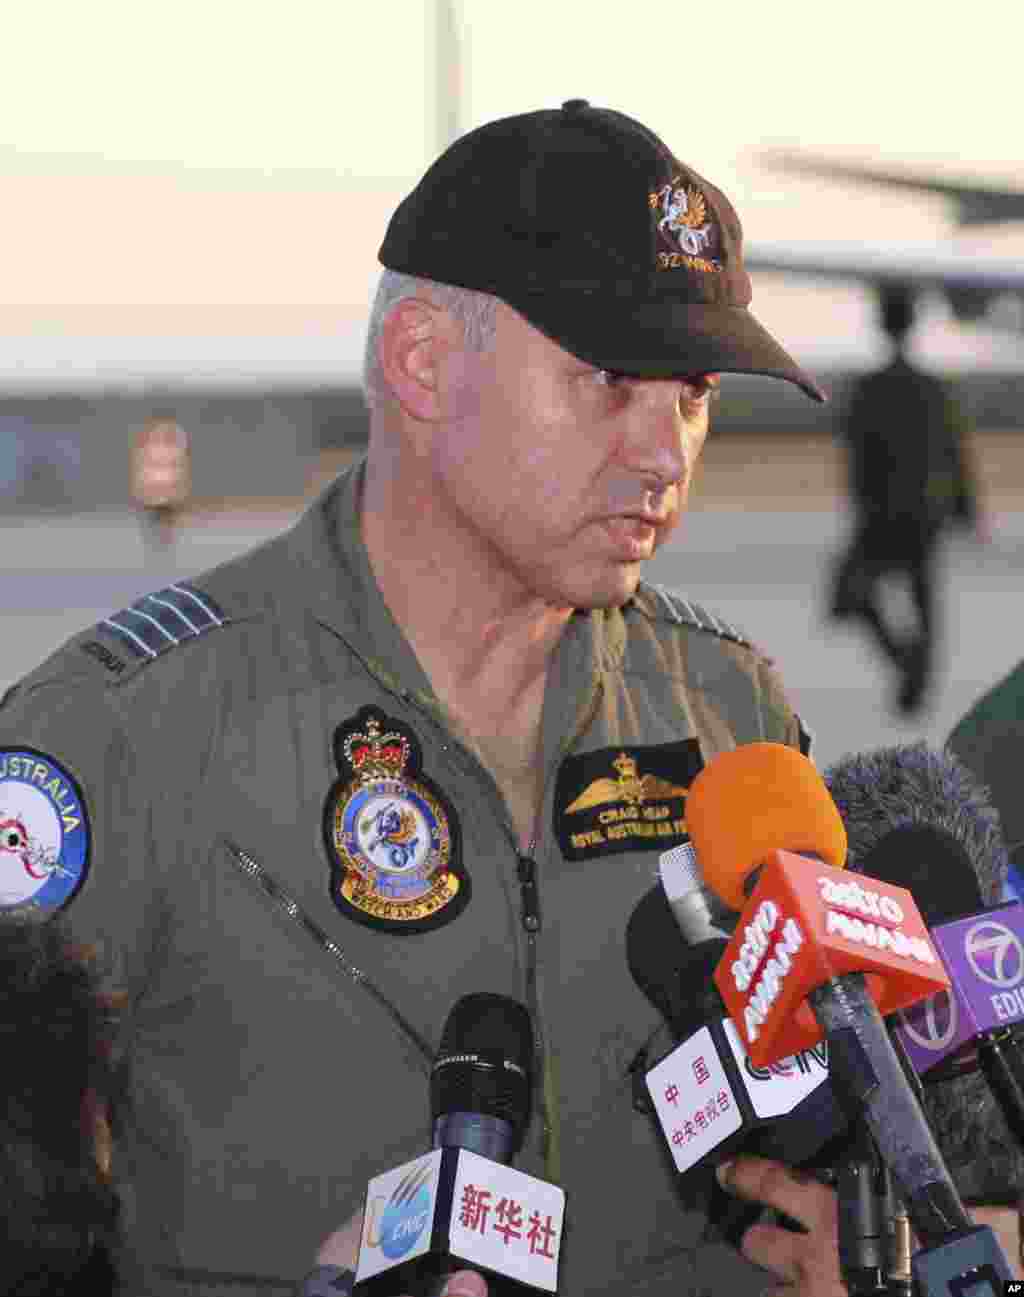 Royal Australian Air Force commander Craig Heap speaks to the media after Japan Maritime Self-Defense Force&#39;s P-3C Orion arrived to help with search operations for the missing Malaysia Airlines plane, at Pearce Base in Perth, Australia, March 23, 2014.